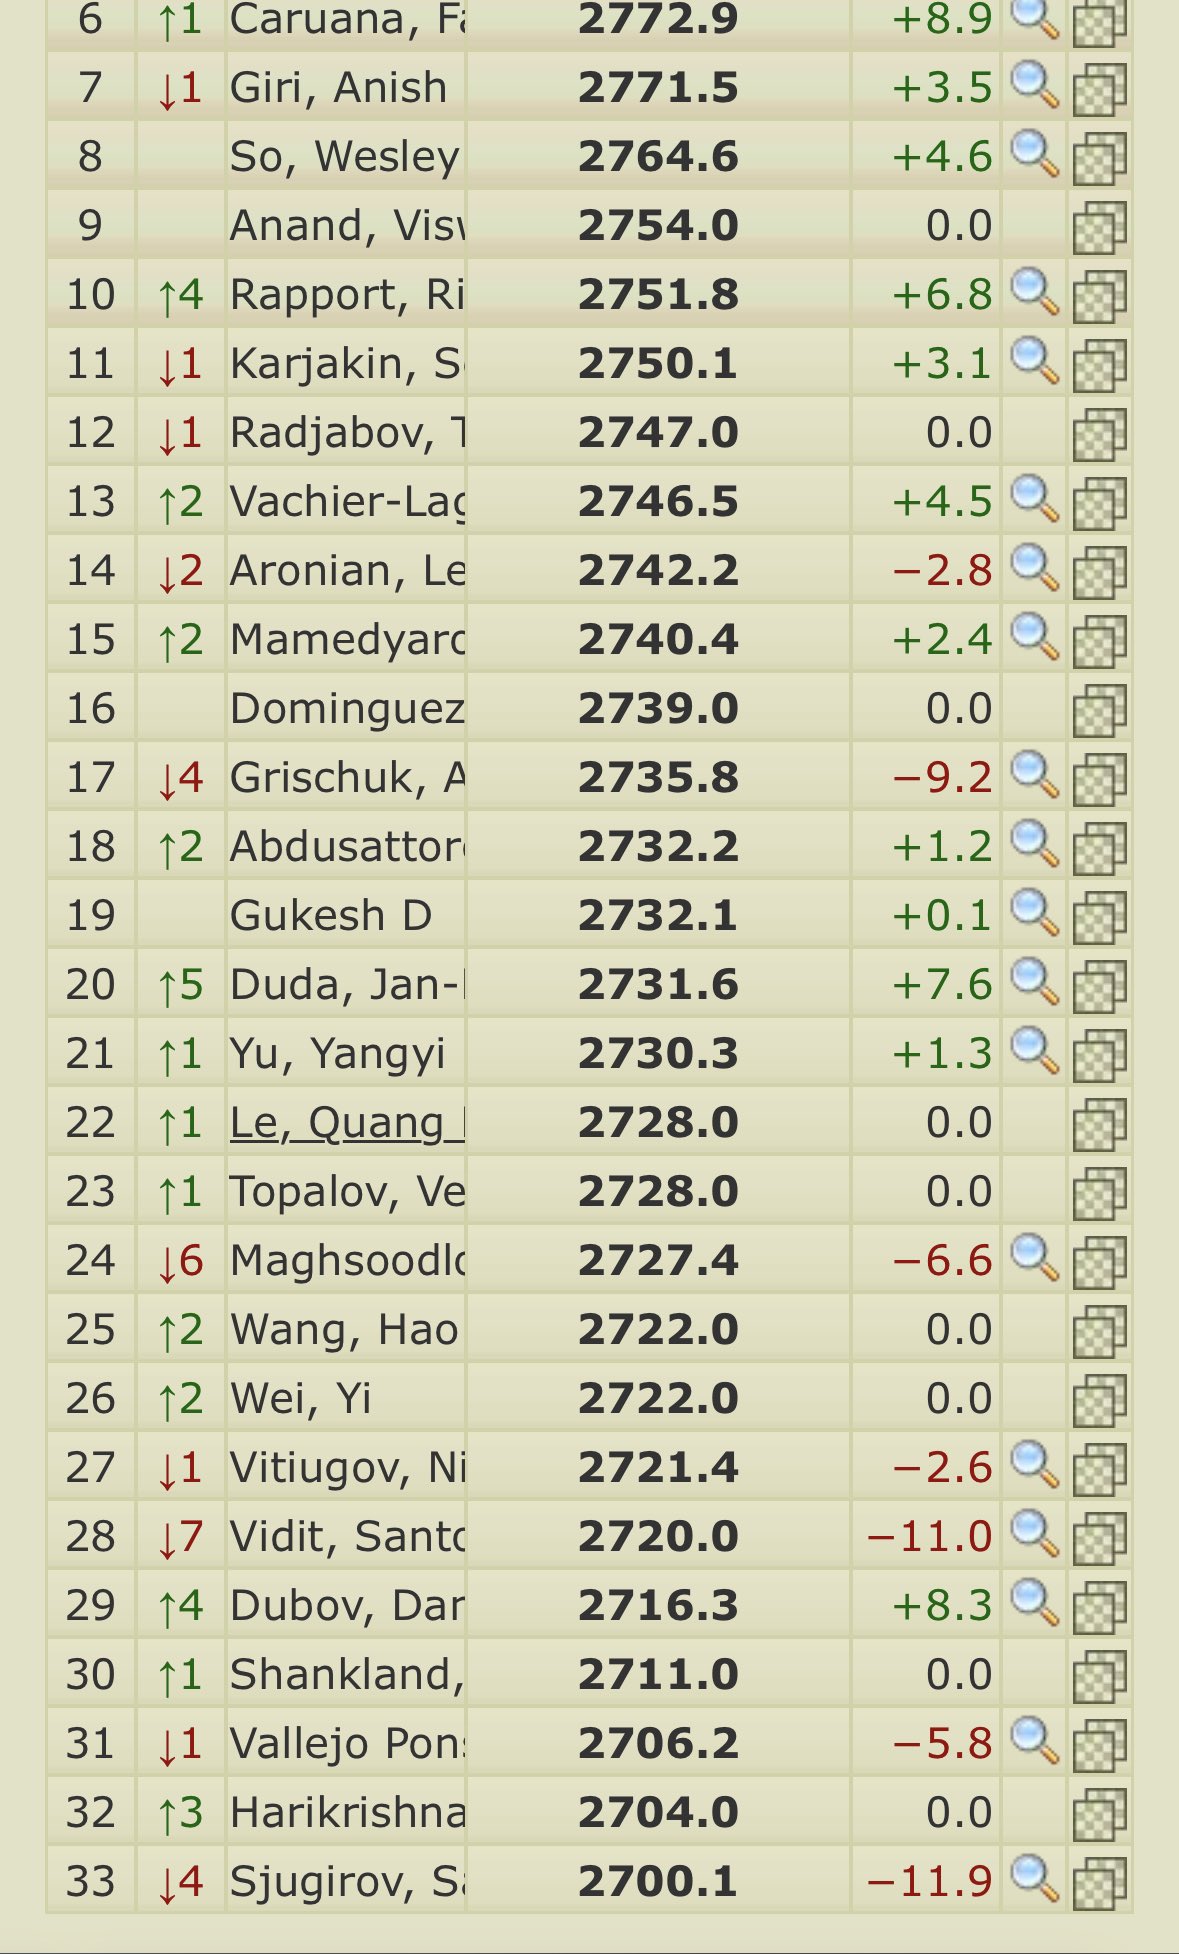 Ah yes, the average player has a MUCH higher rating than 1762 - Chess  Forums 